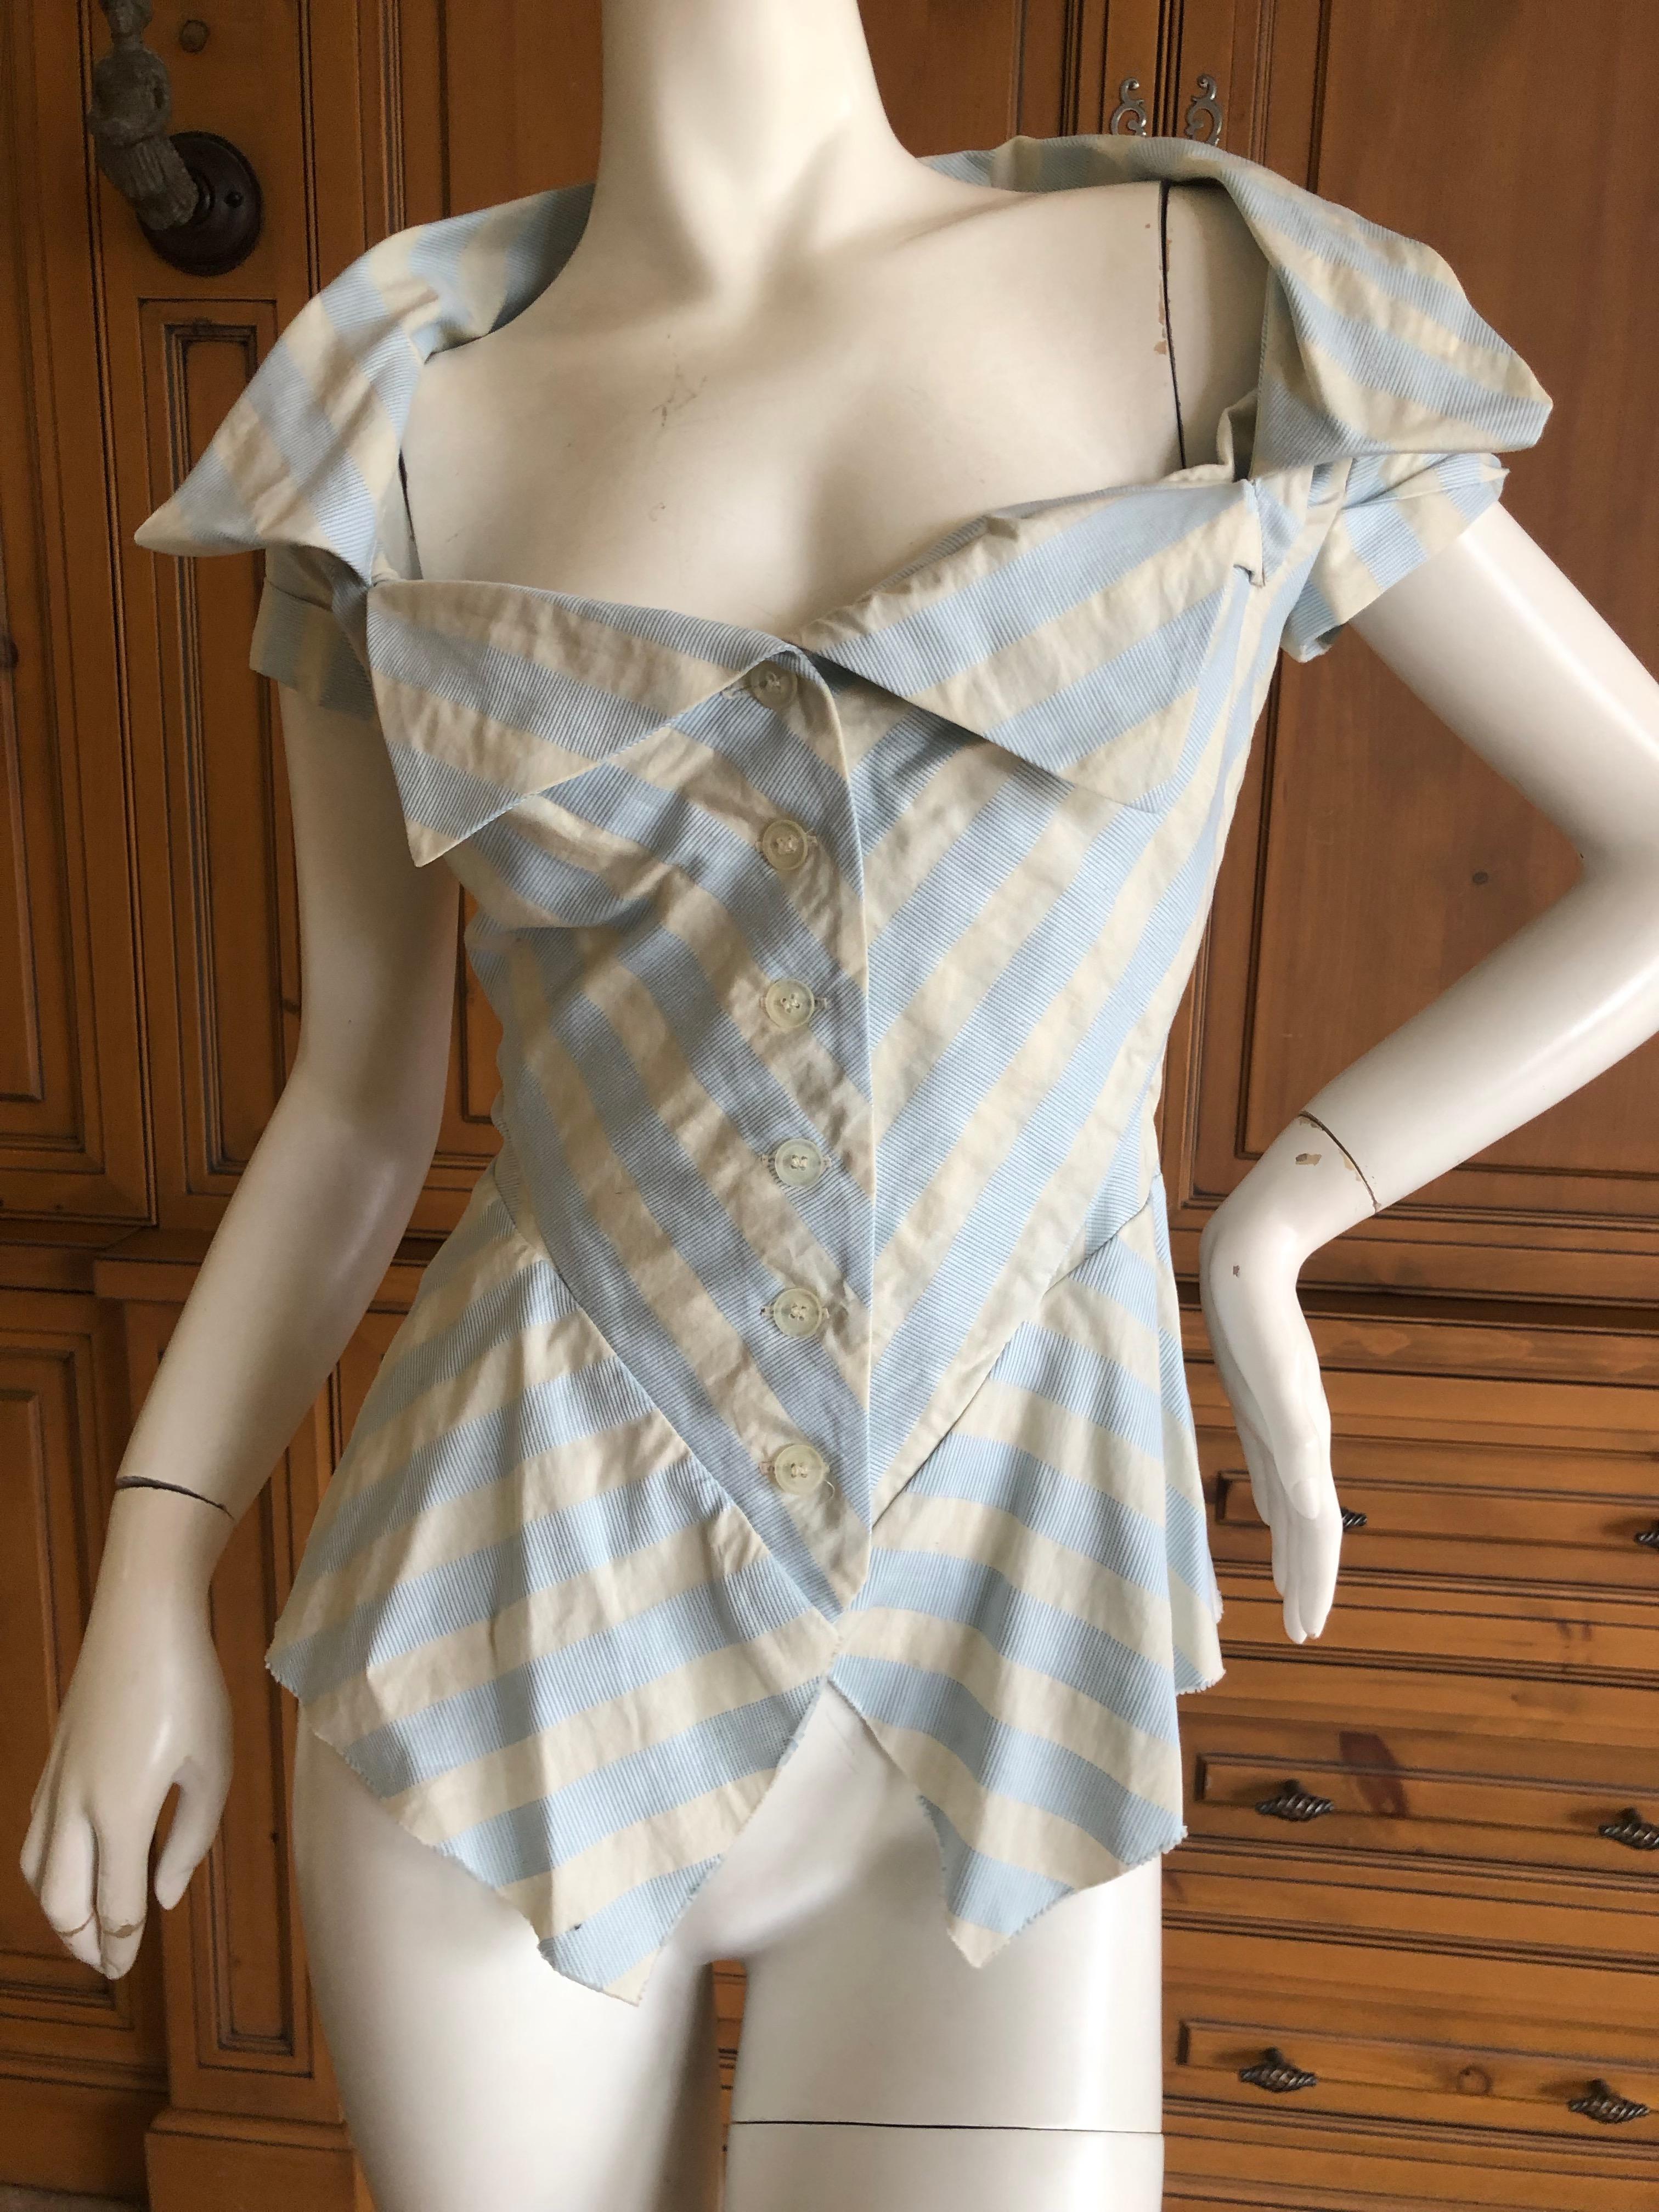 Vivienne Westwood Anglomania Blue Awning Stripe Low Cut Cotton Blouse
Size 40
Bust 34